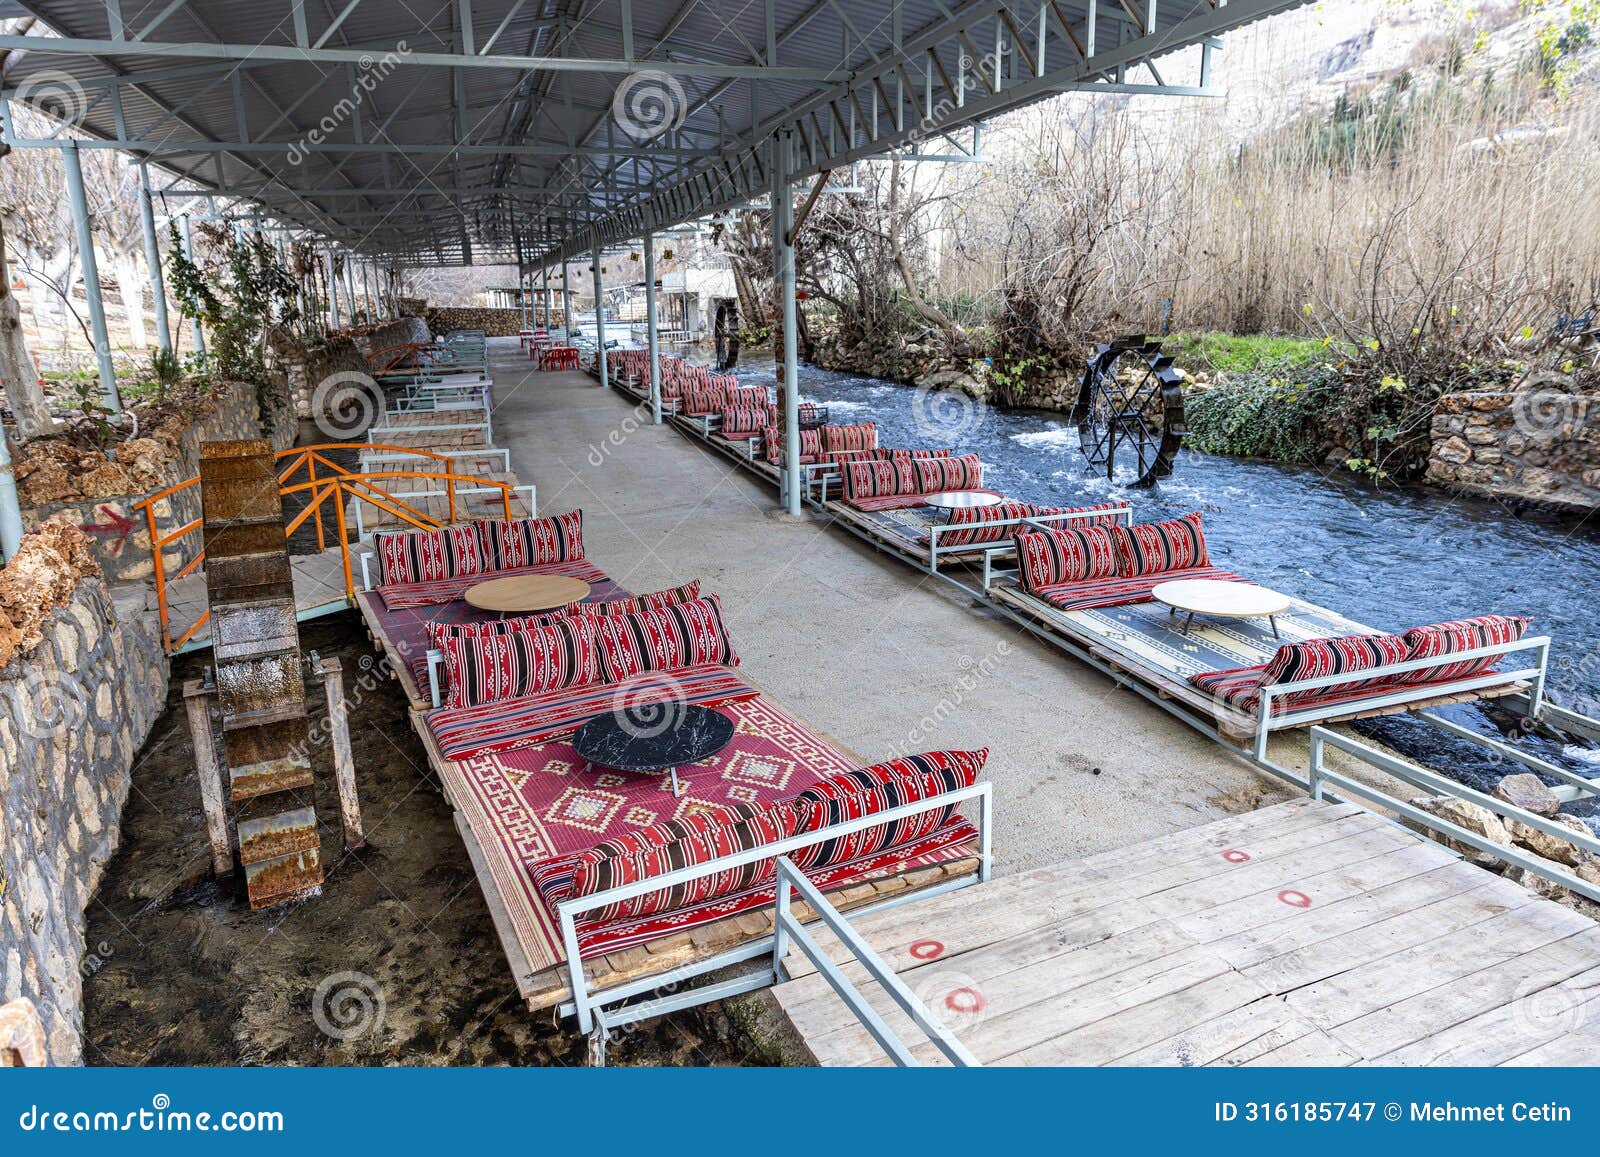 this is a resting place in the water of the beyazsu stream spring. beyazsu creek, which originates from the foothills of the